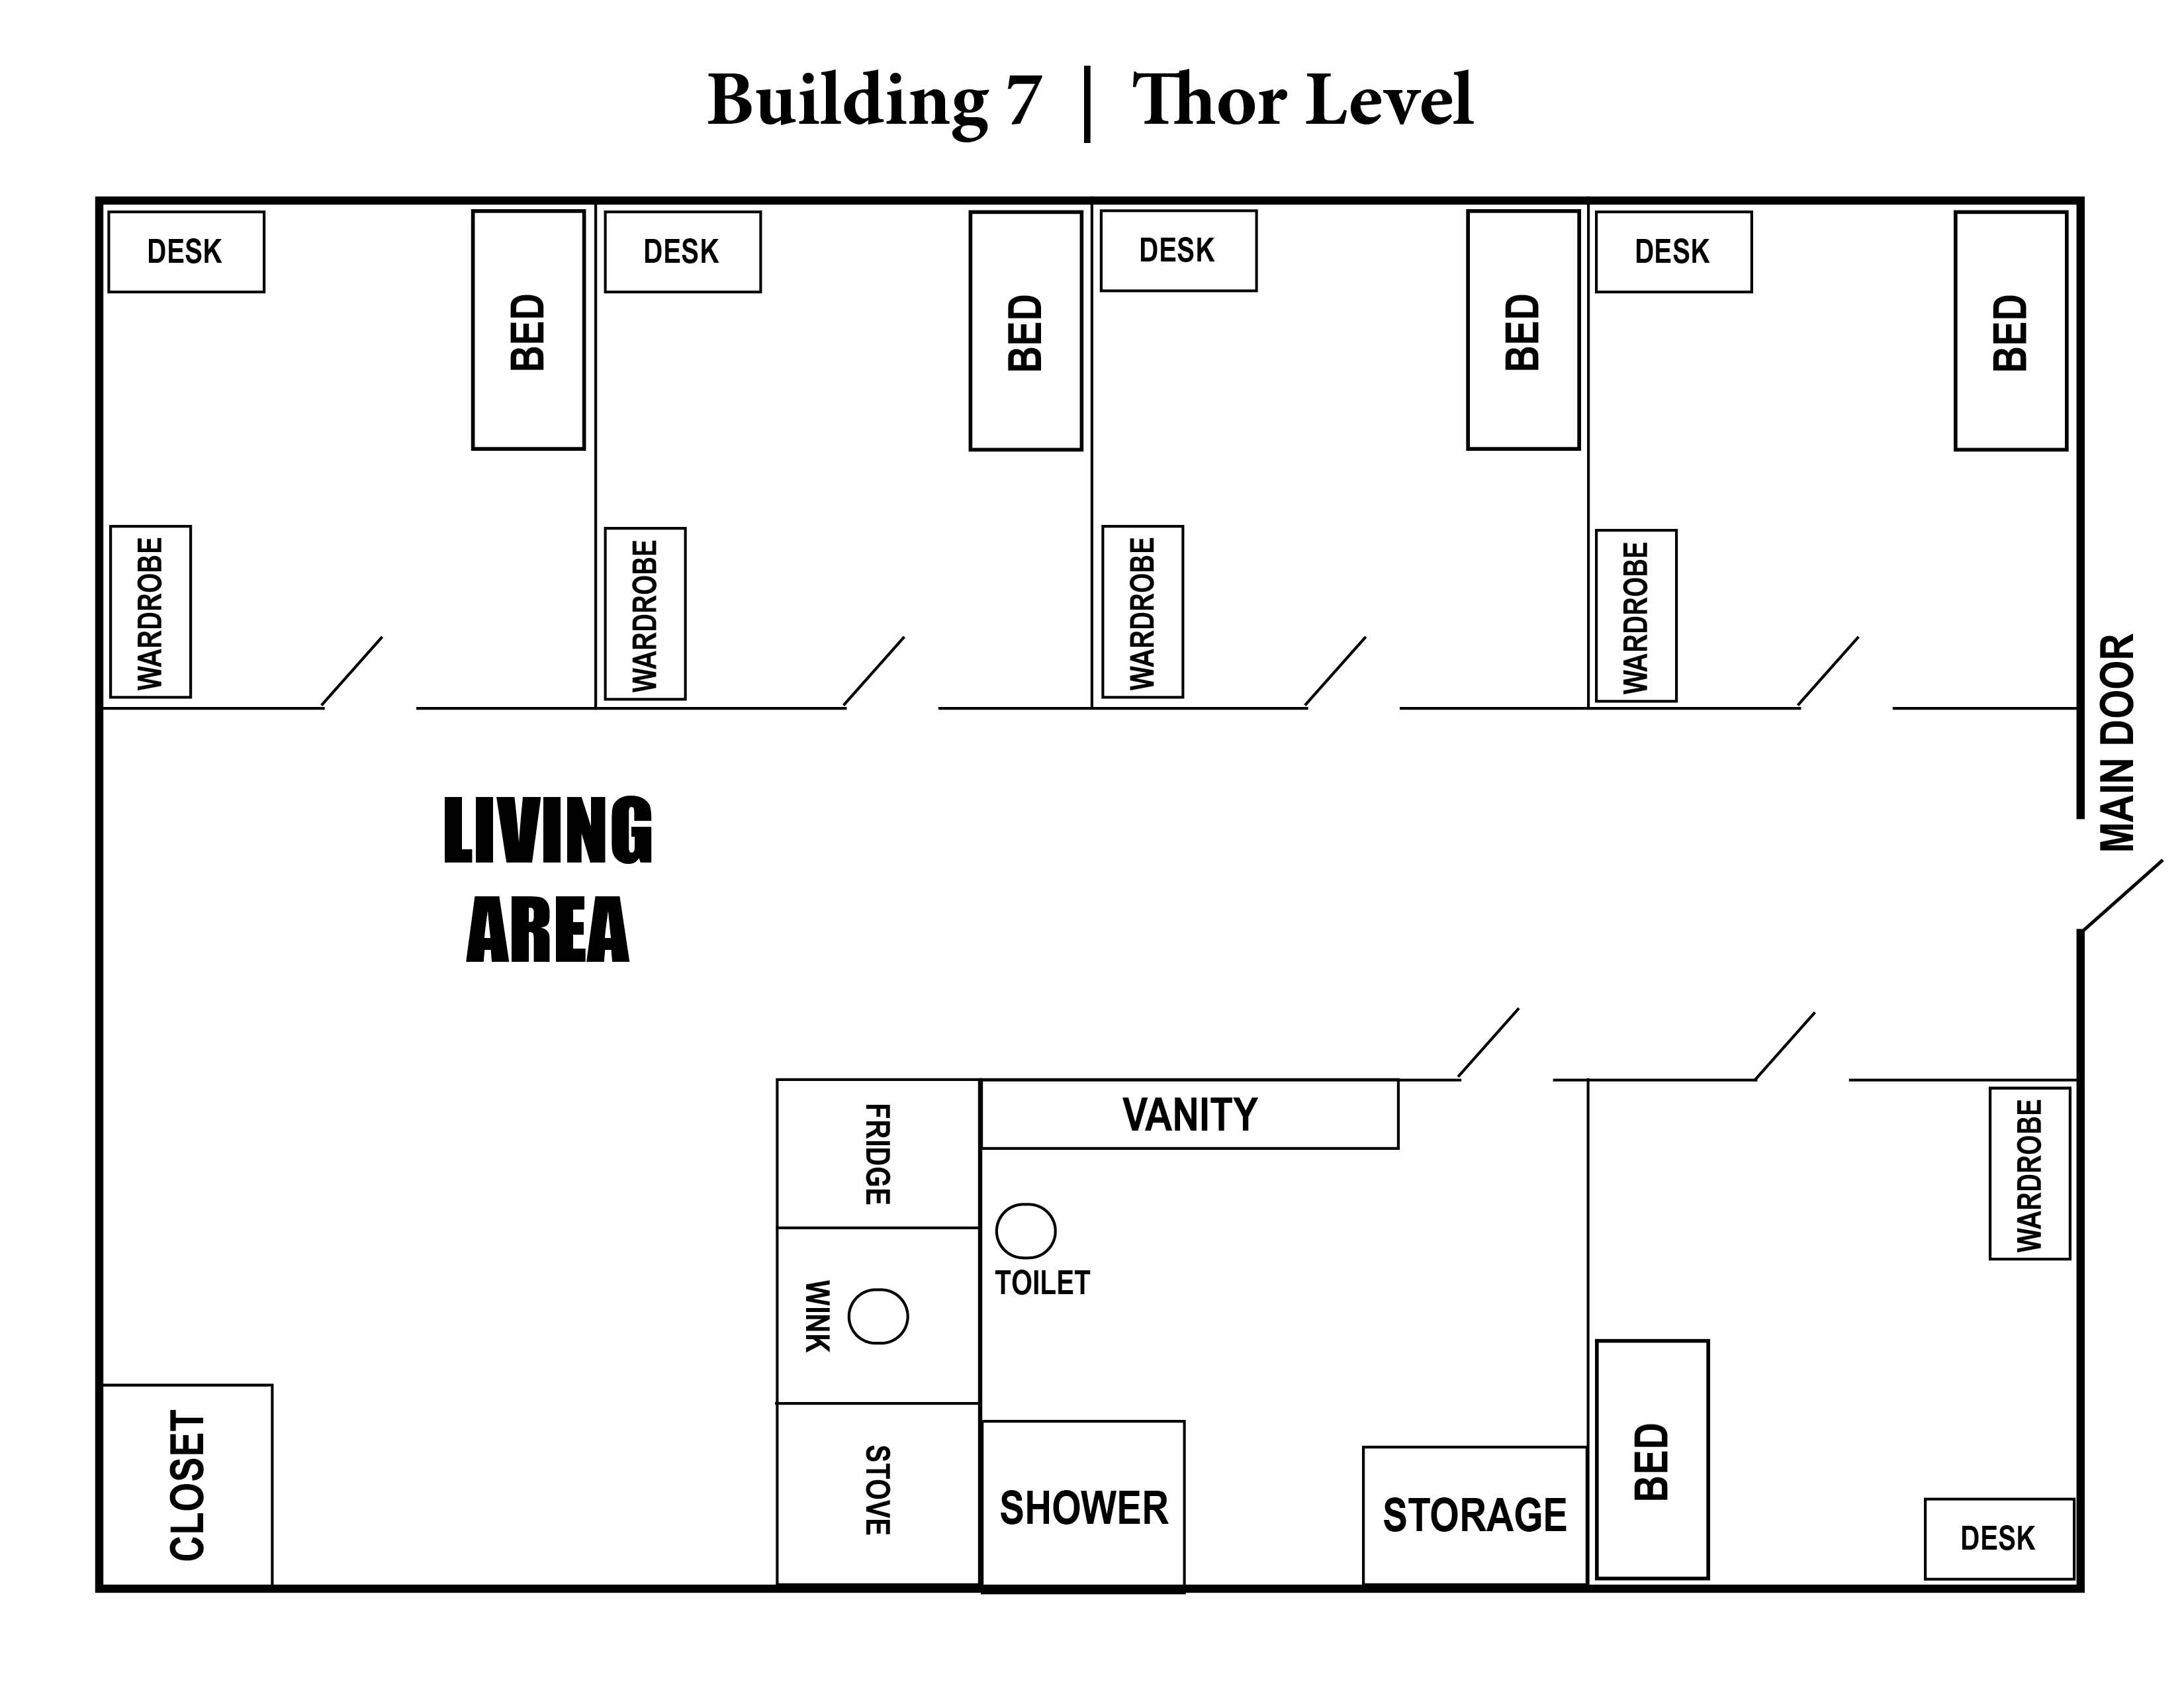 A photo of the layout of Building 7.